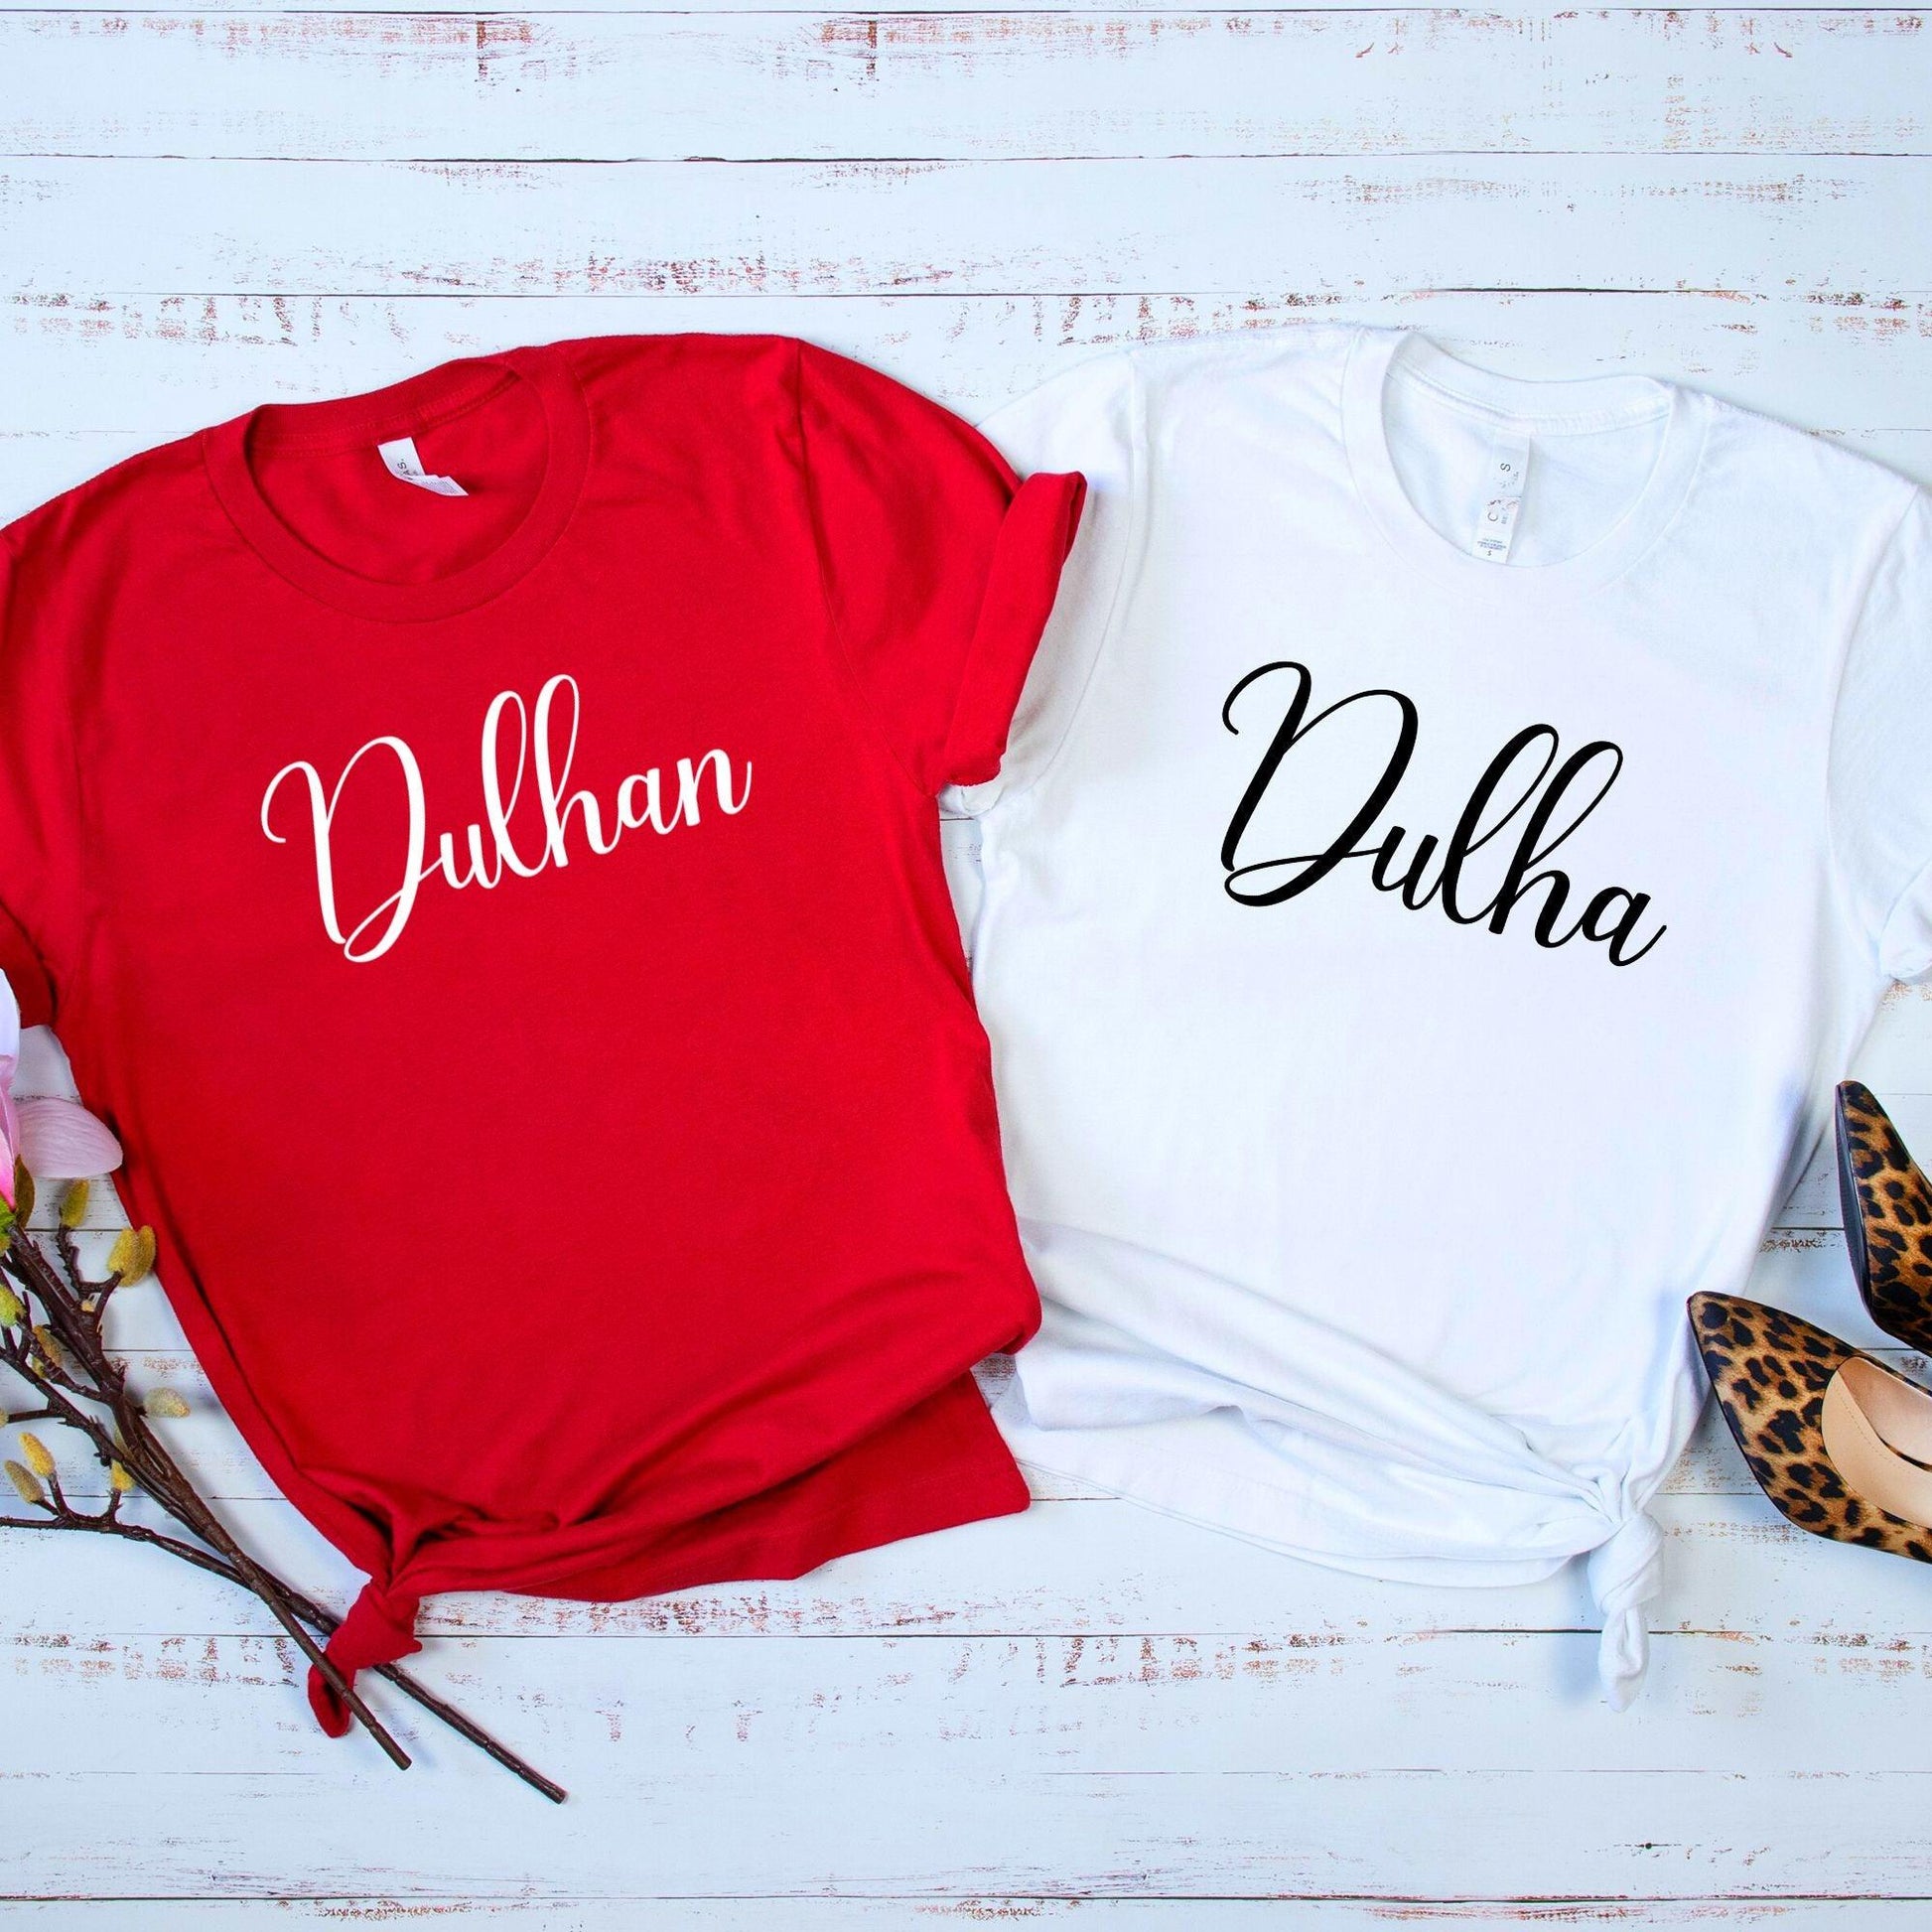 Dulha and Dulhan (Groom and Bride) Indian Wedding Shirts - Artkins Lifestyle